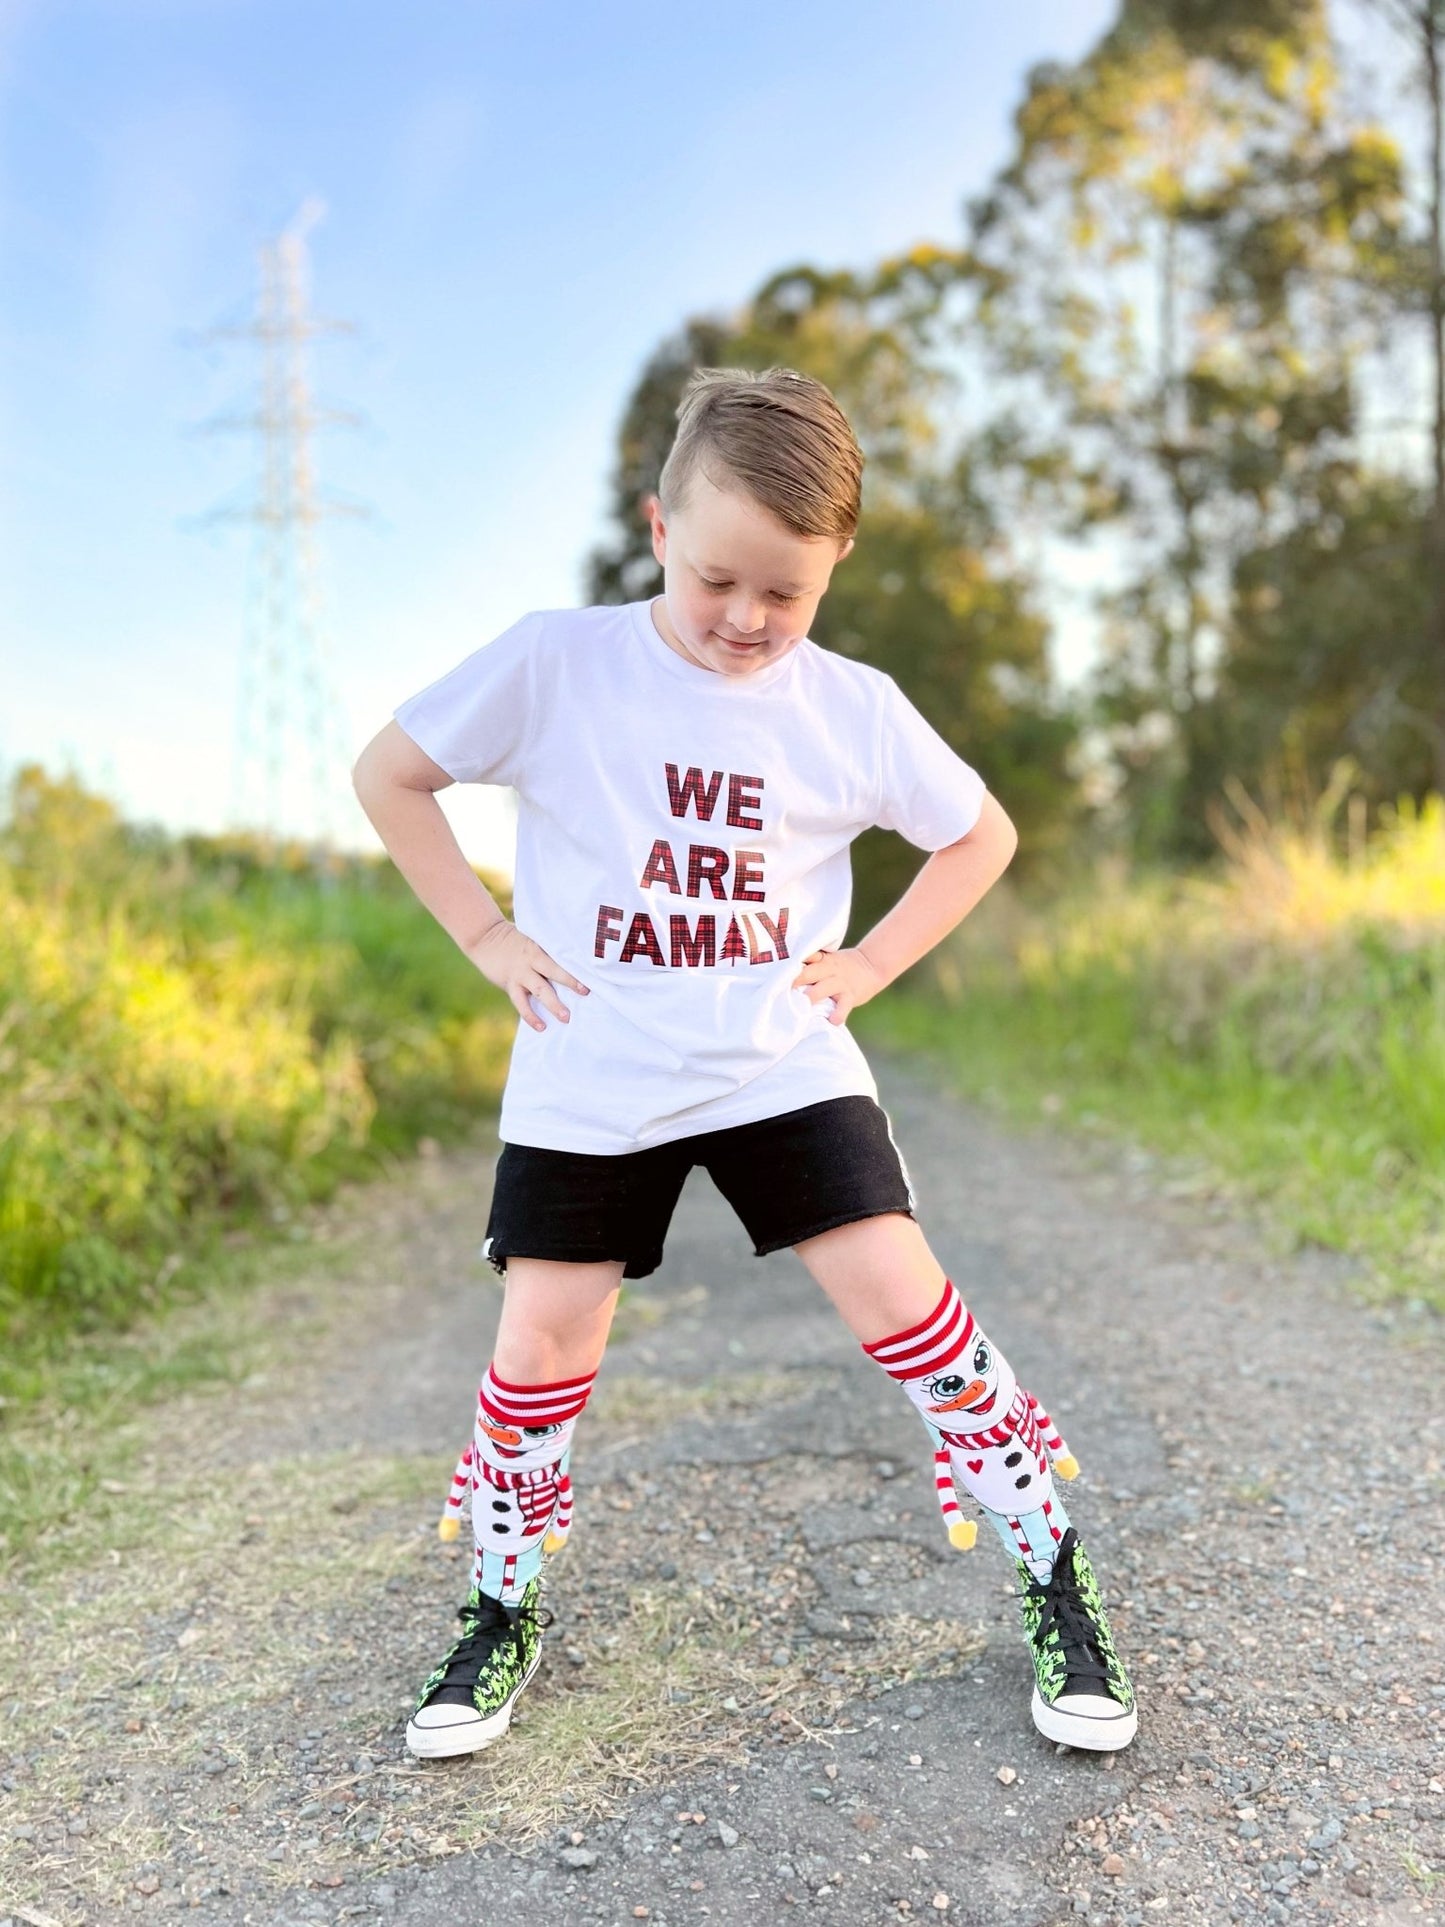 WE ARE FAMILY KIDS T-SHIRT - Toots Kids